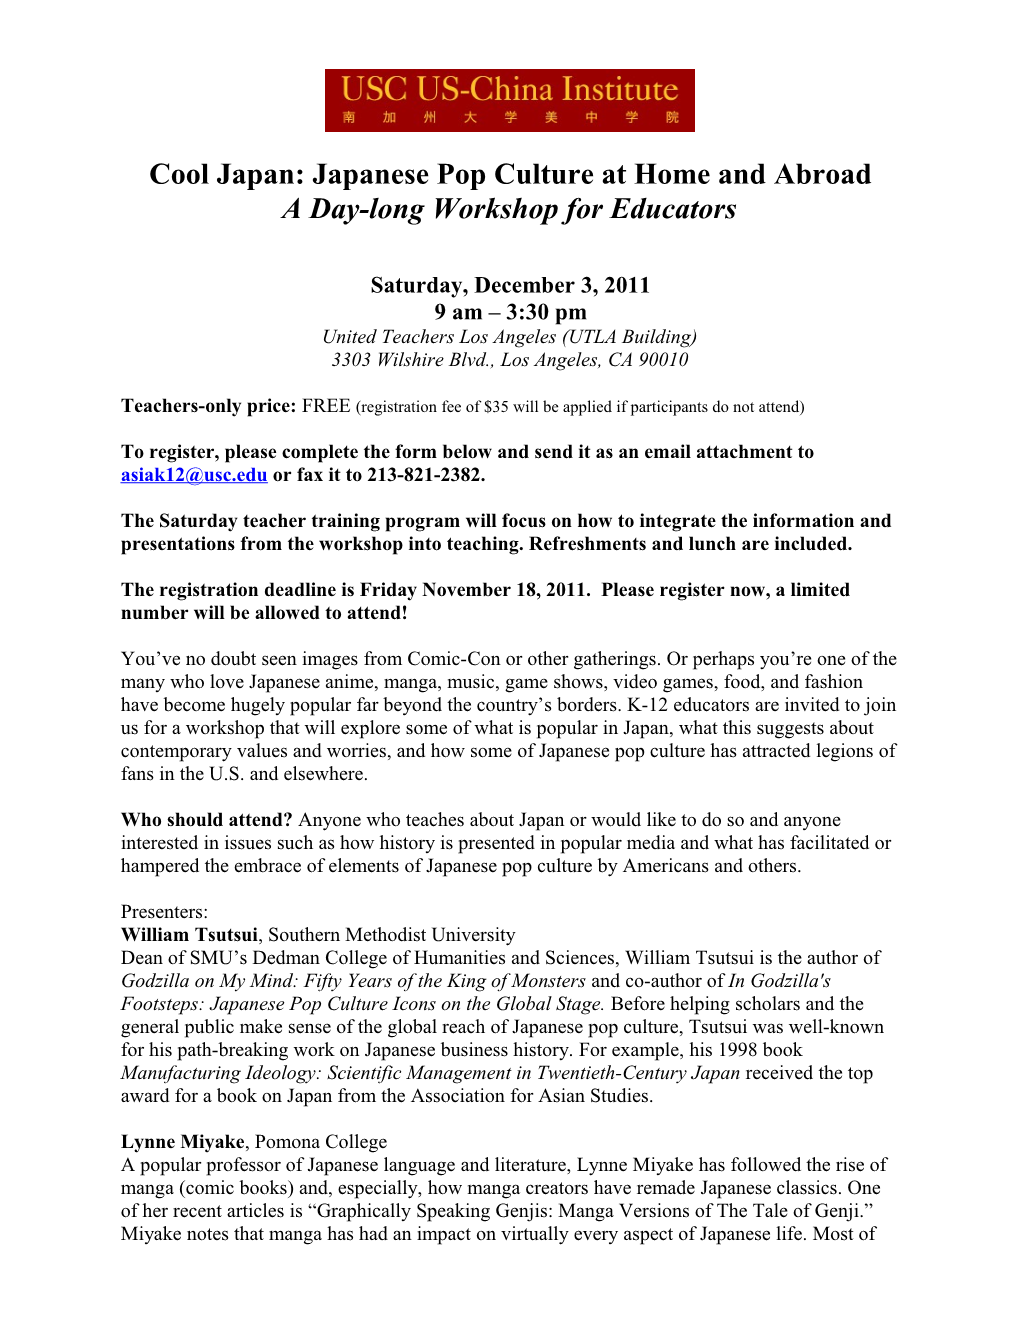 Cool Japan: Japanese Pop Culture at Home and Abroad